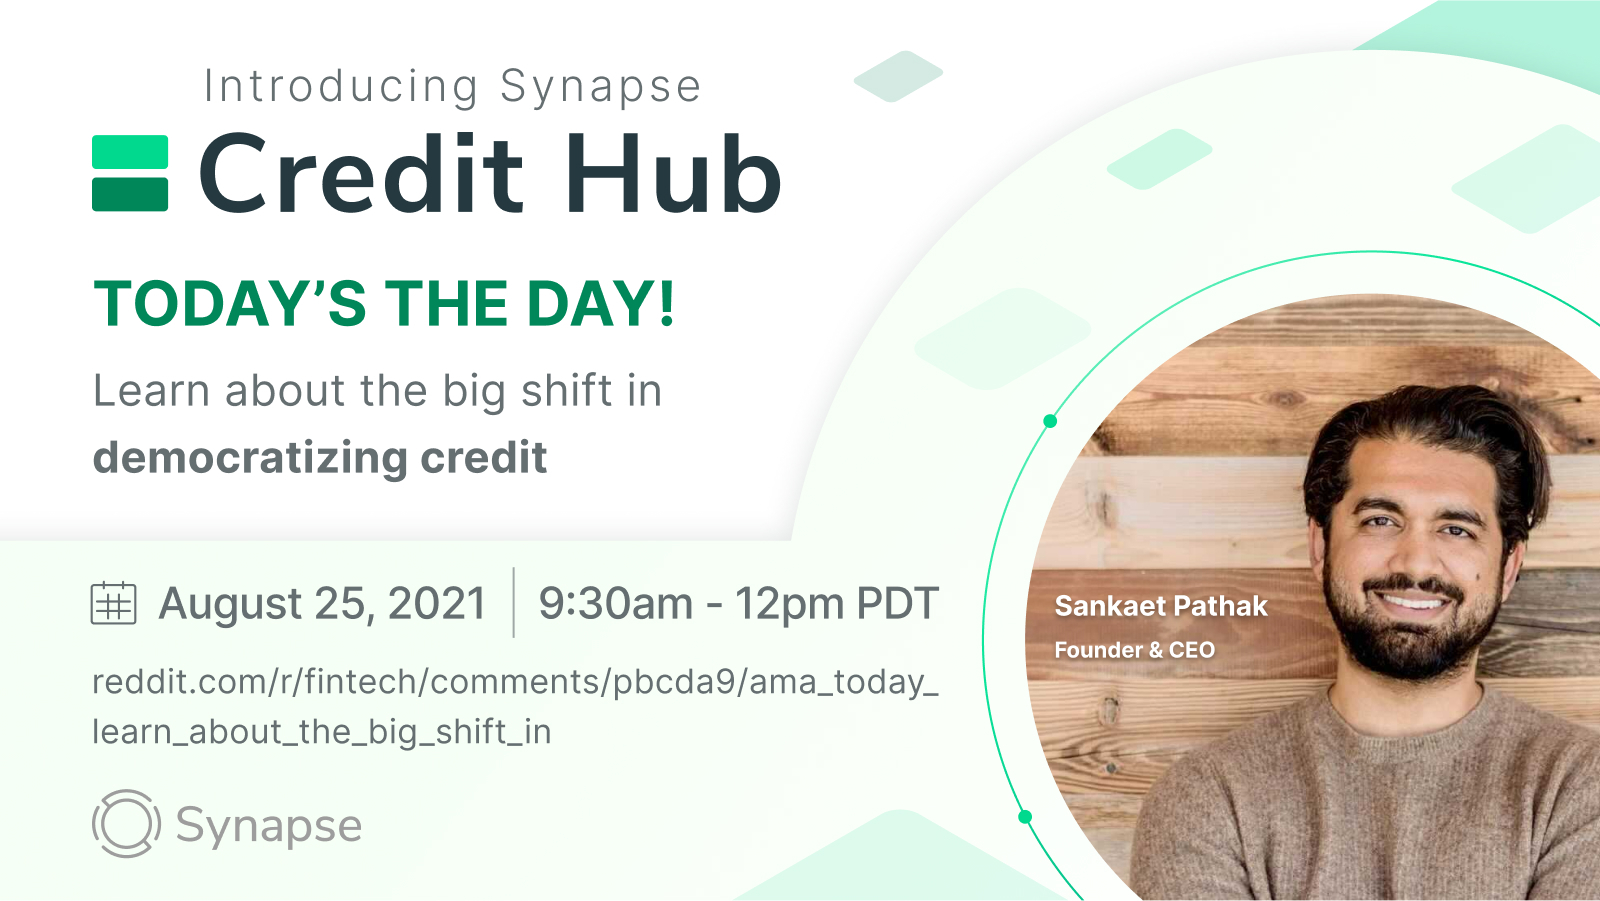 Synapse on X: Fintech enthusiasts, come join Sankaet Pathak the CEO of  Synapse today at 9:30 am PST for the AMA about the democratization of  credit and Synapse's new platform, Credit Hub.